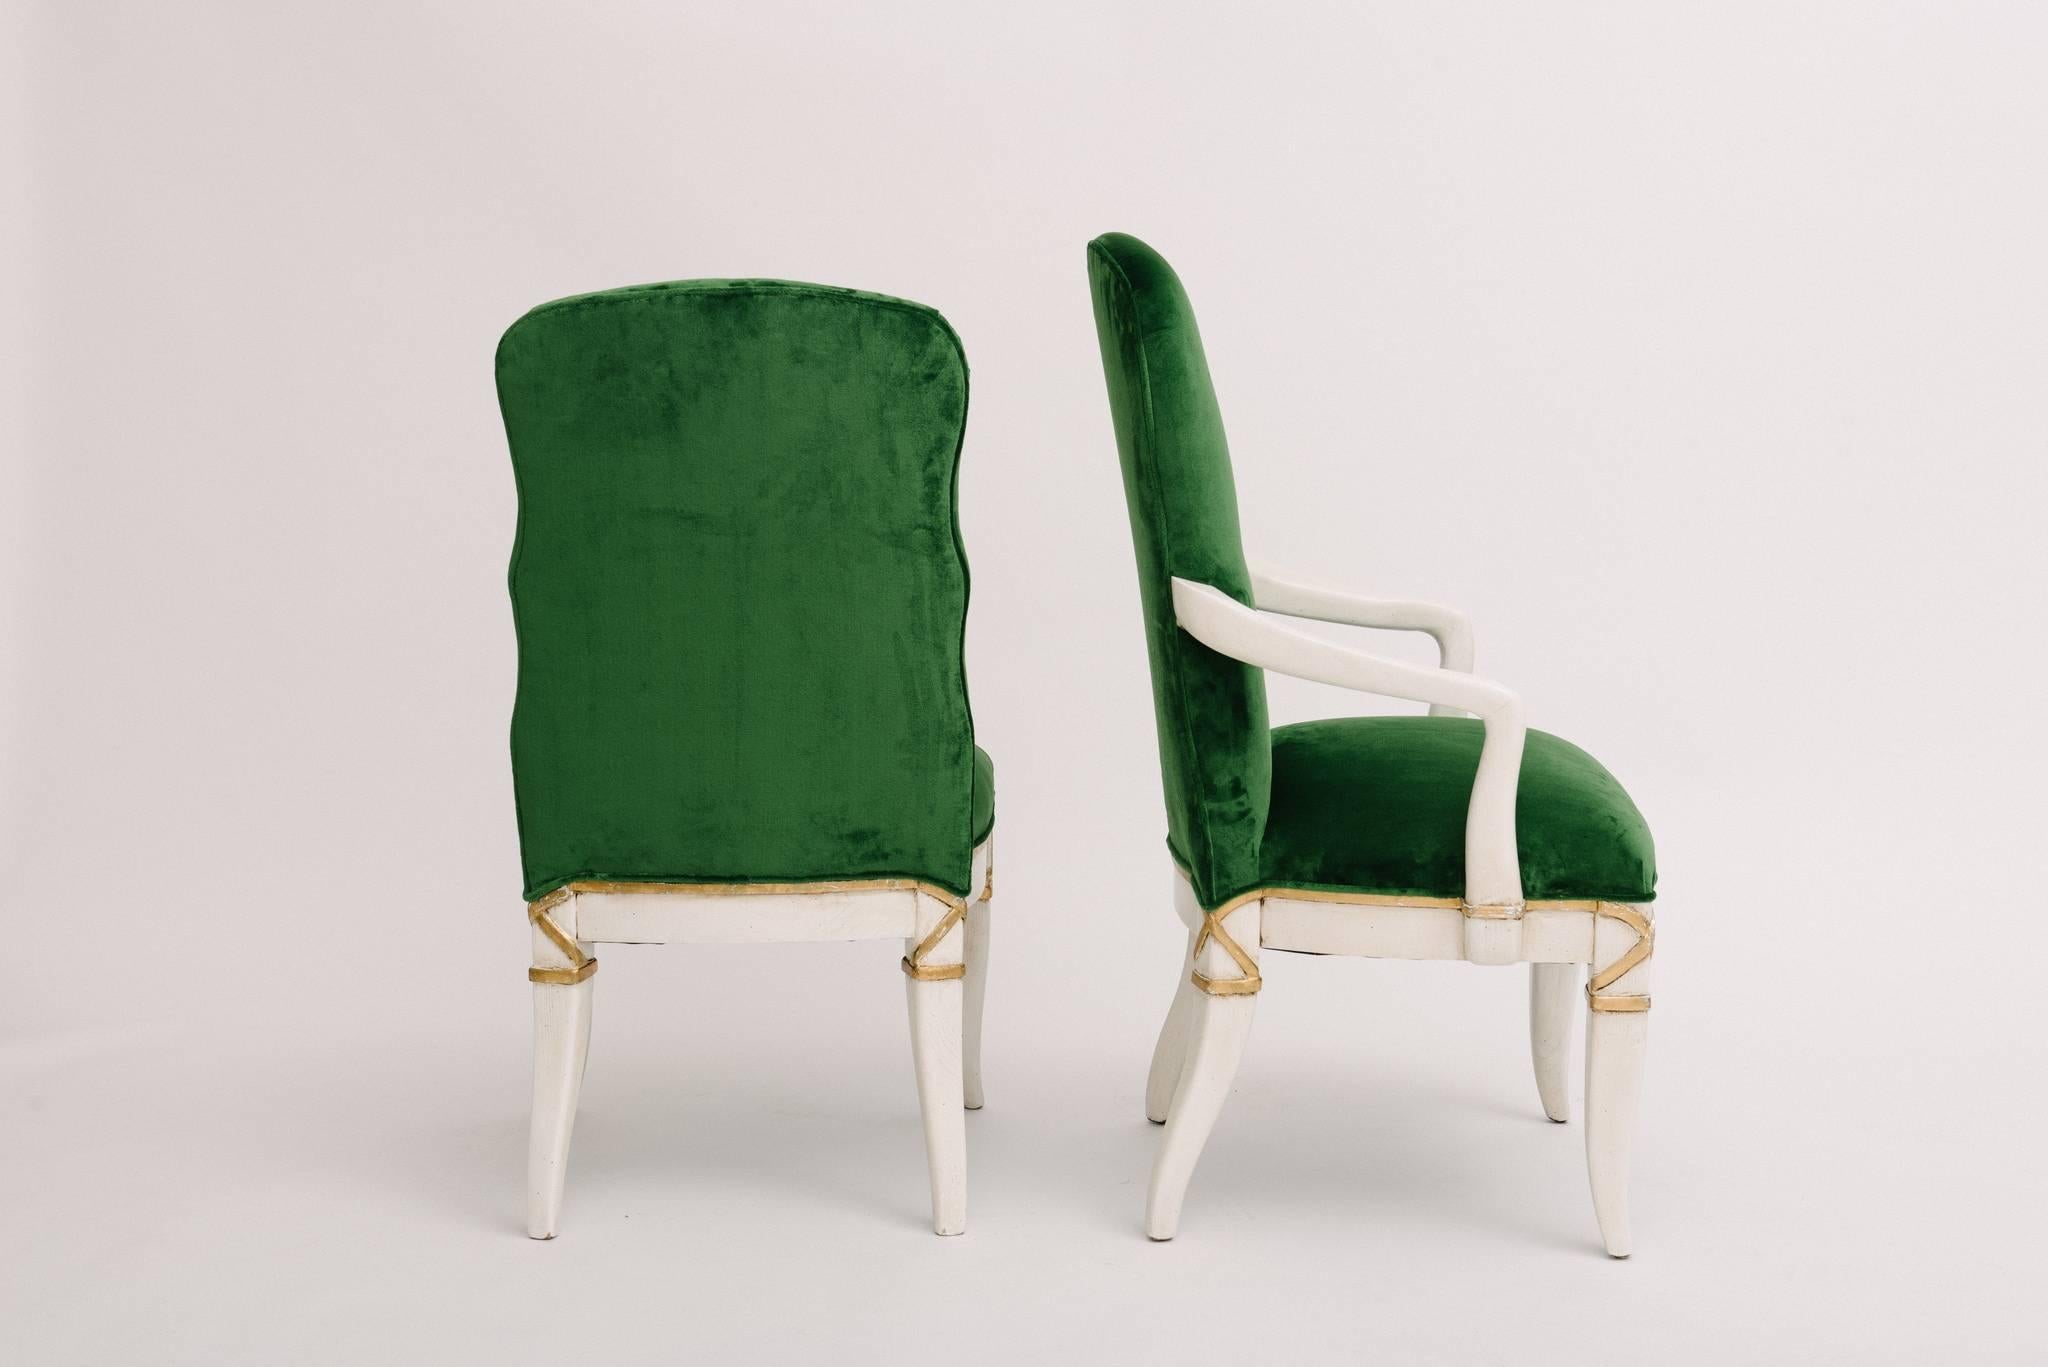 A fabulous set of ten Marge Carson dining chairs. These sturdy and comfortable oak chairs are white painted and gold gilded, rebuilt and restyled in a Rubelli Matora Smeraldo green velvet. A fabric cutting is available upon request.

Measures: Two